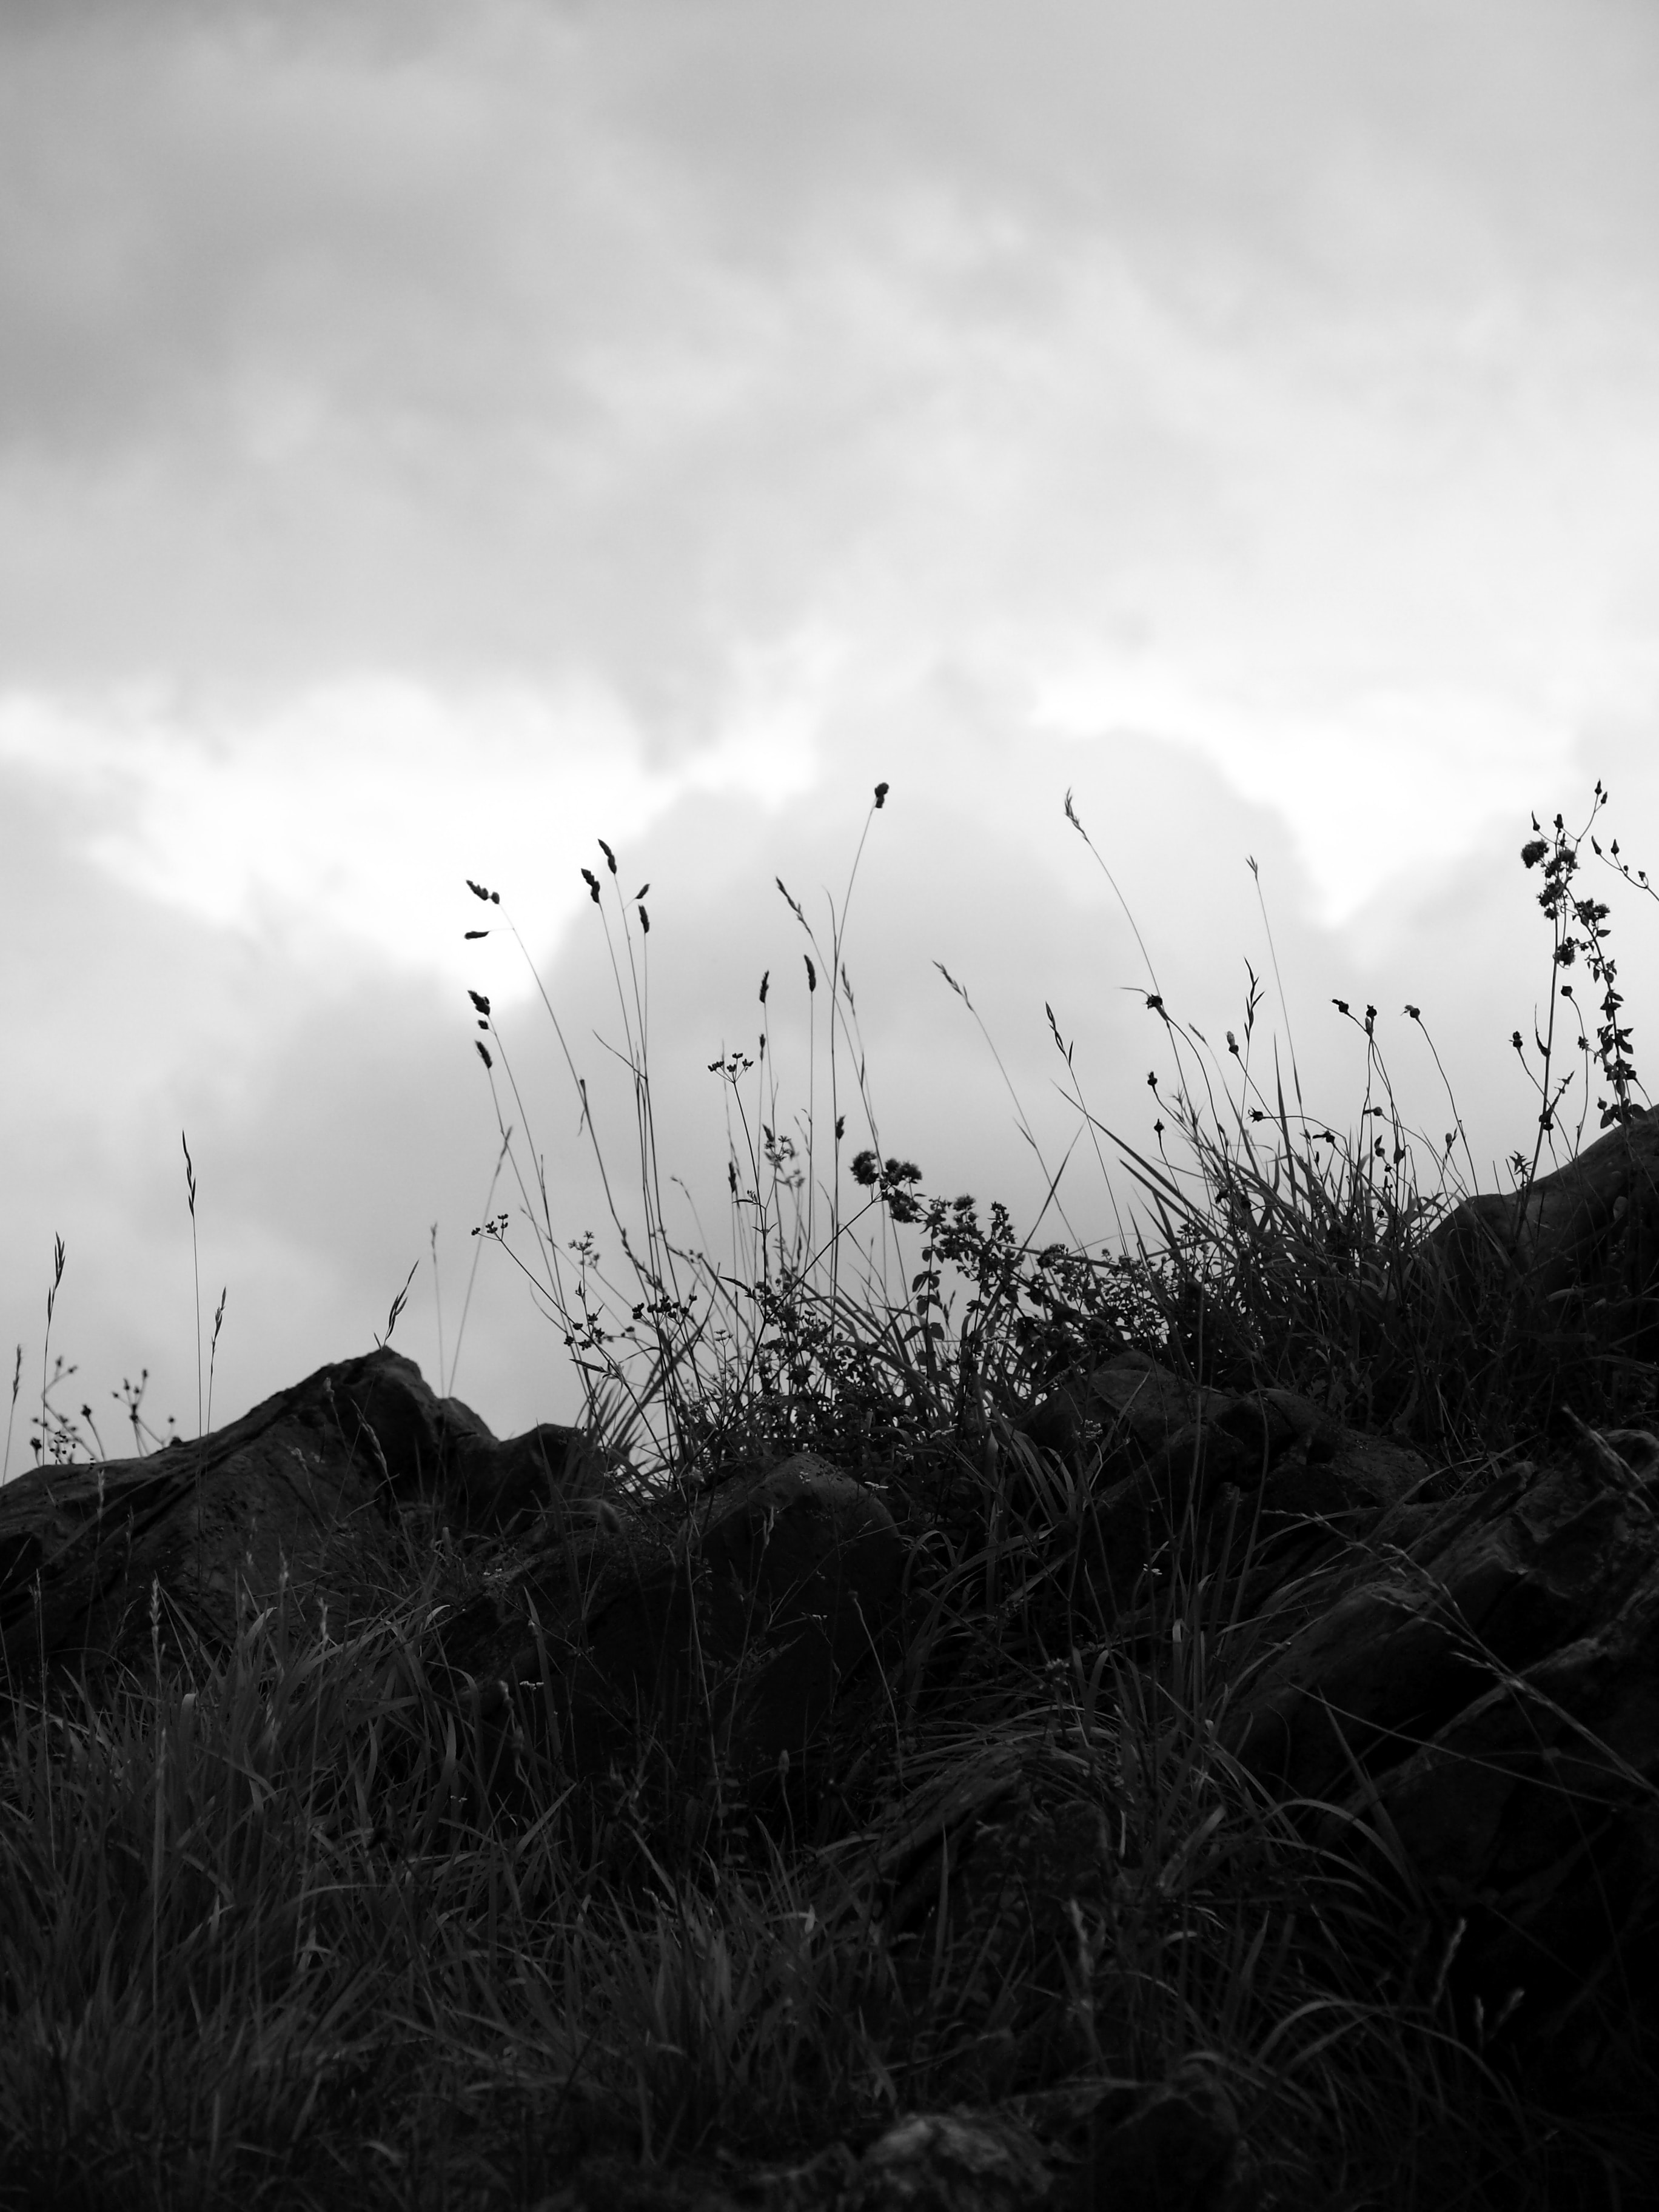 clouds, nature, grass, stones, sky, bw, chb, hill cellphone